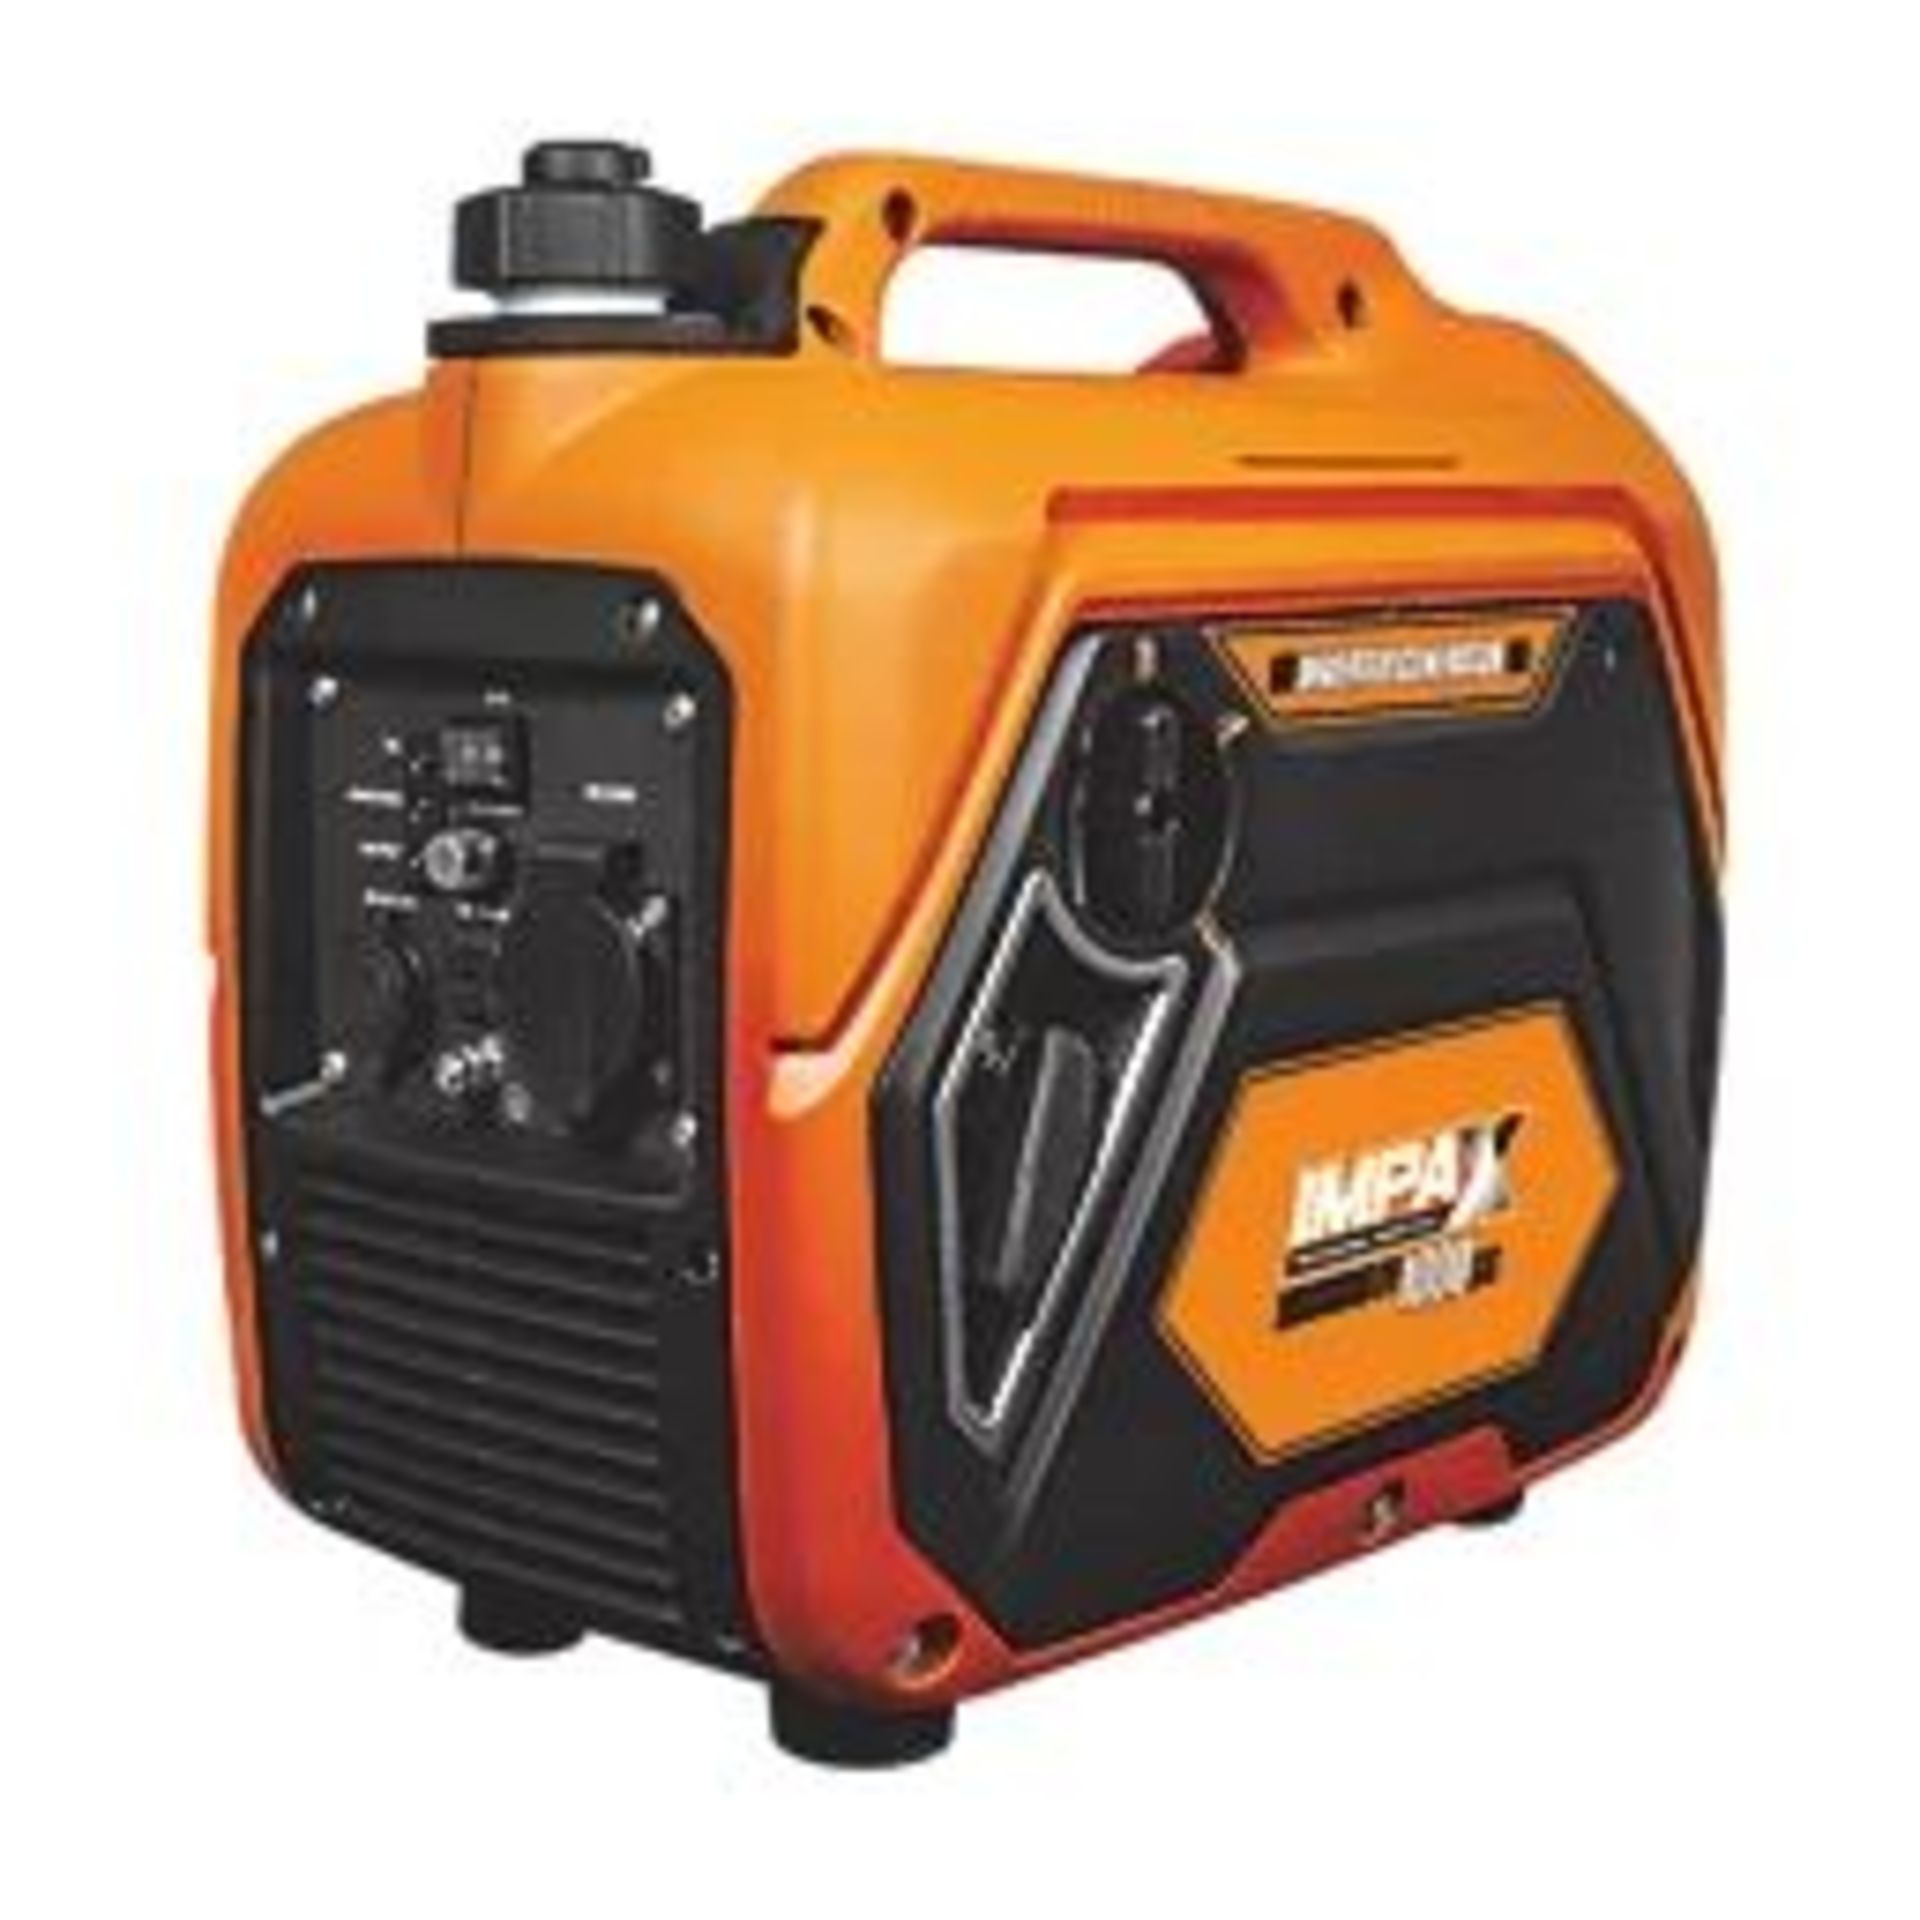 IMPAX IM1000SIG 1050W INVERTER GENERATOR 230V. -R14.6. RRP £349.99. Lightweight, durable and fully-